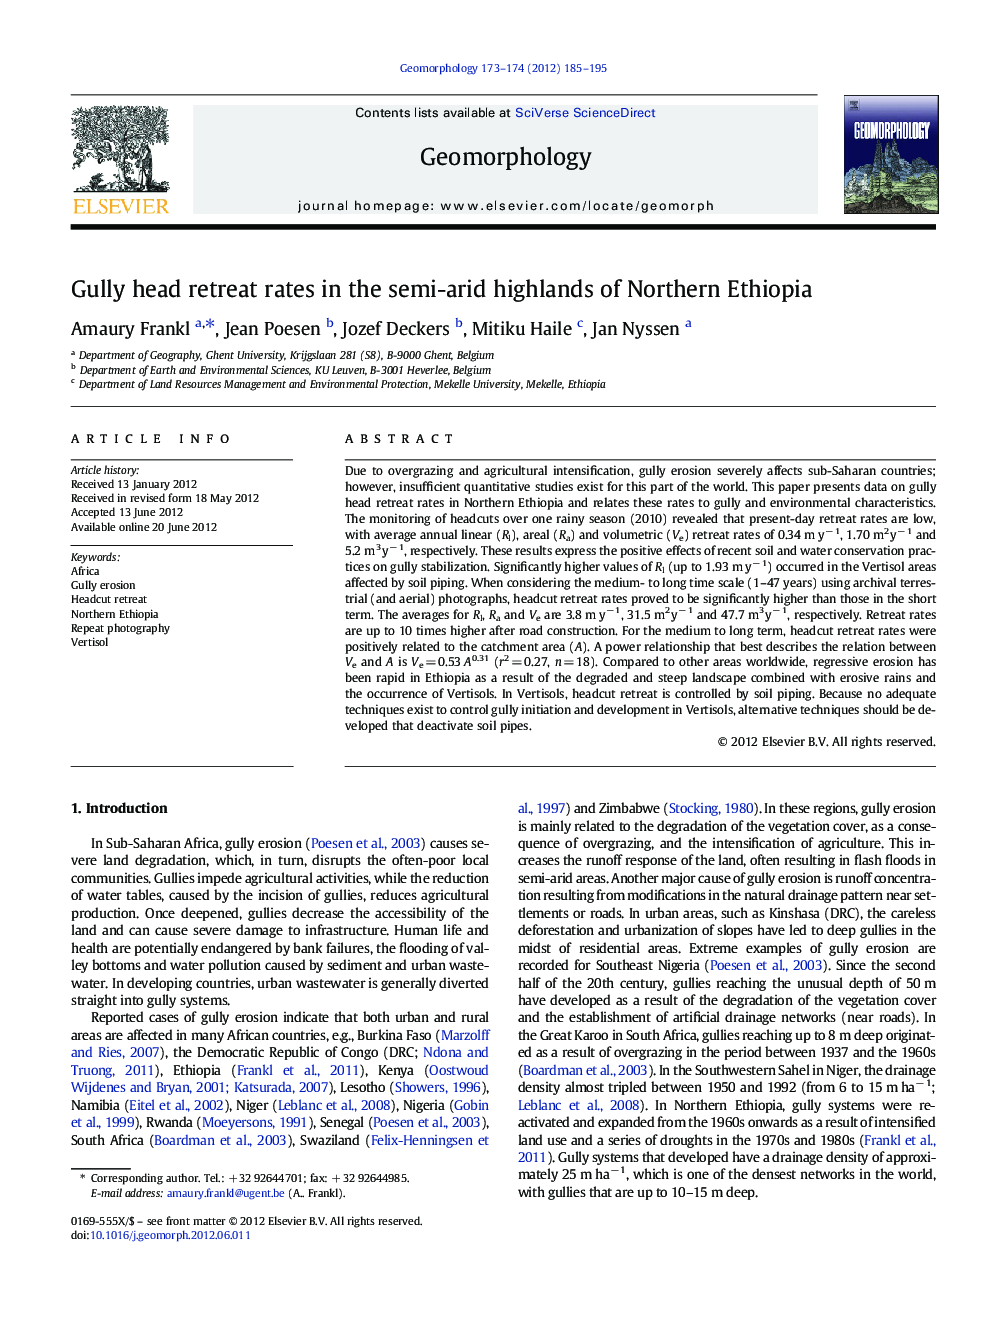 Gully head retreat rates in the semi-arid highlands of Northern Ethiopia